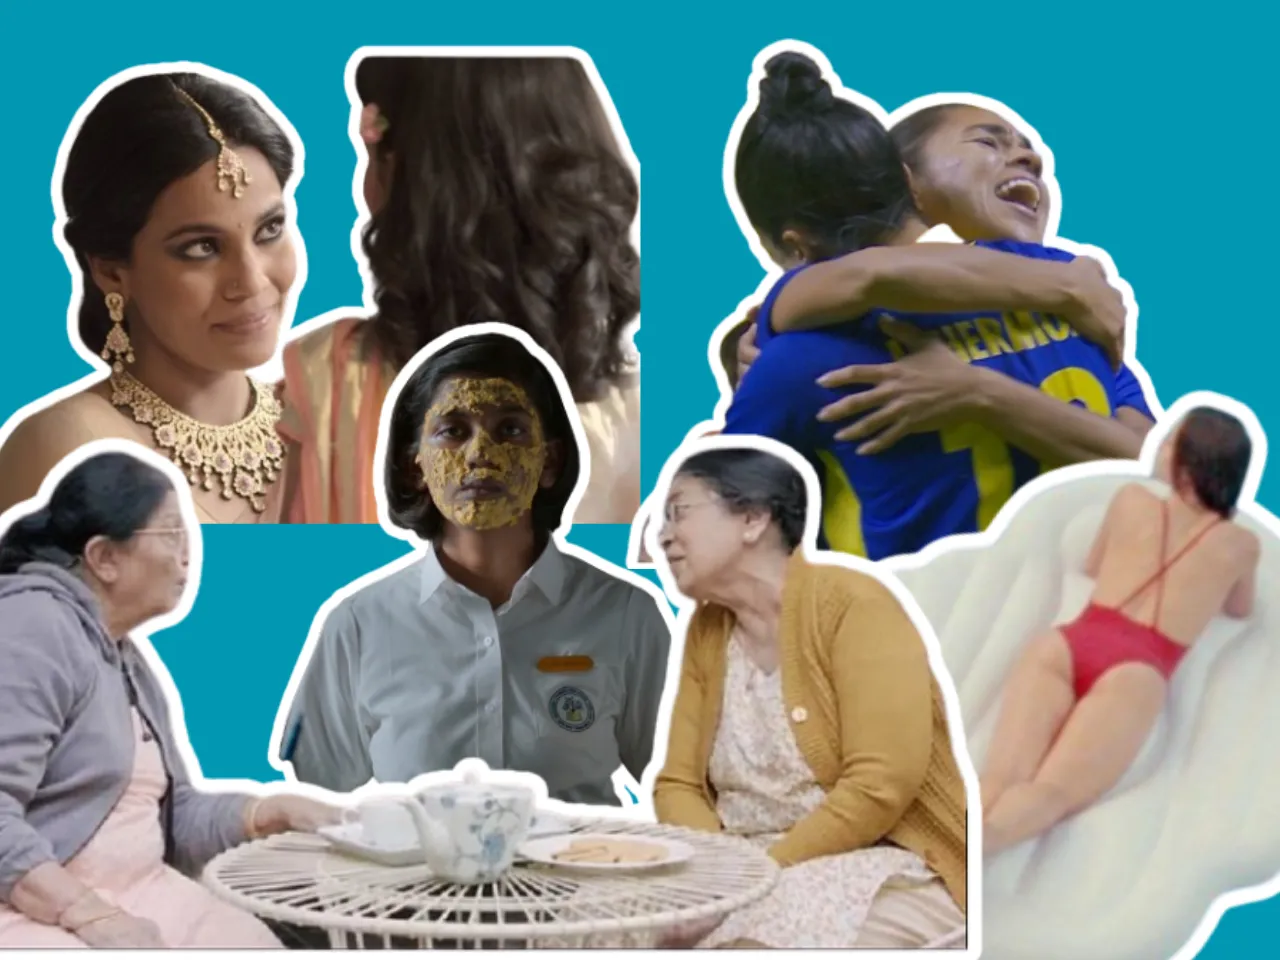 ad campaigns that empower women